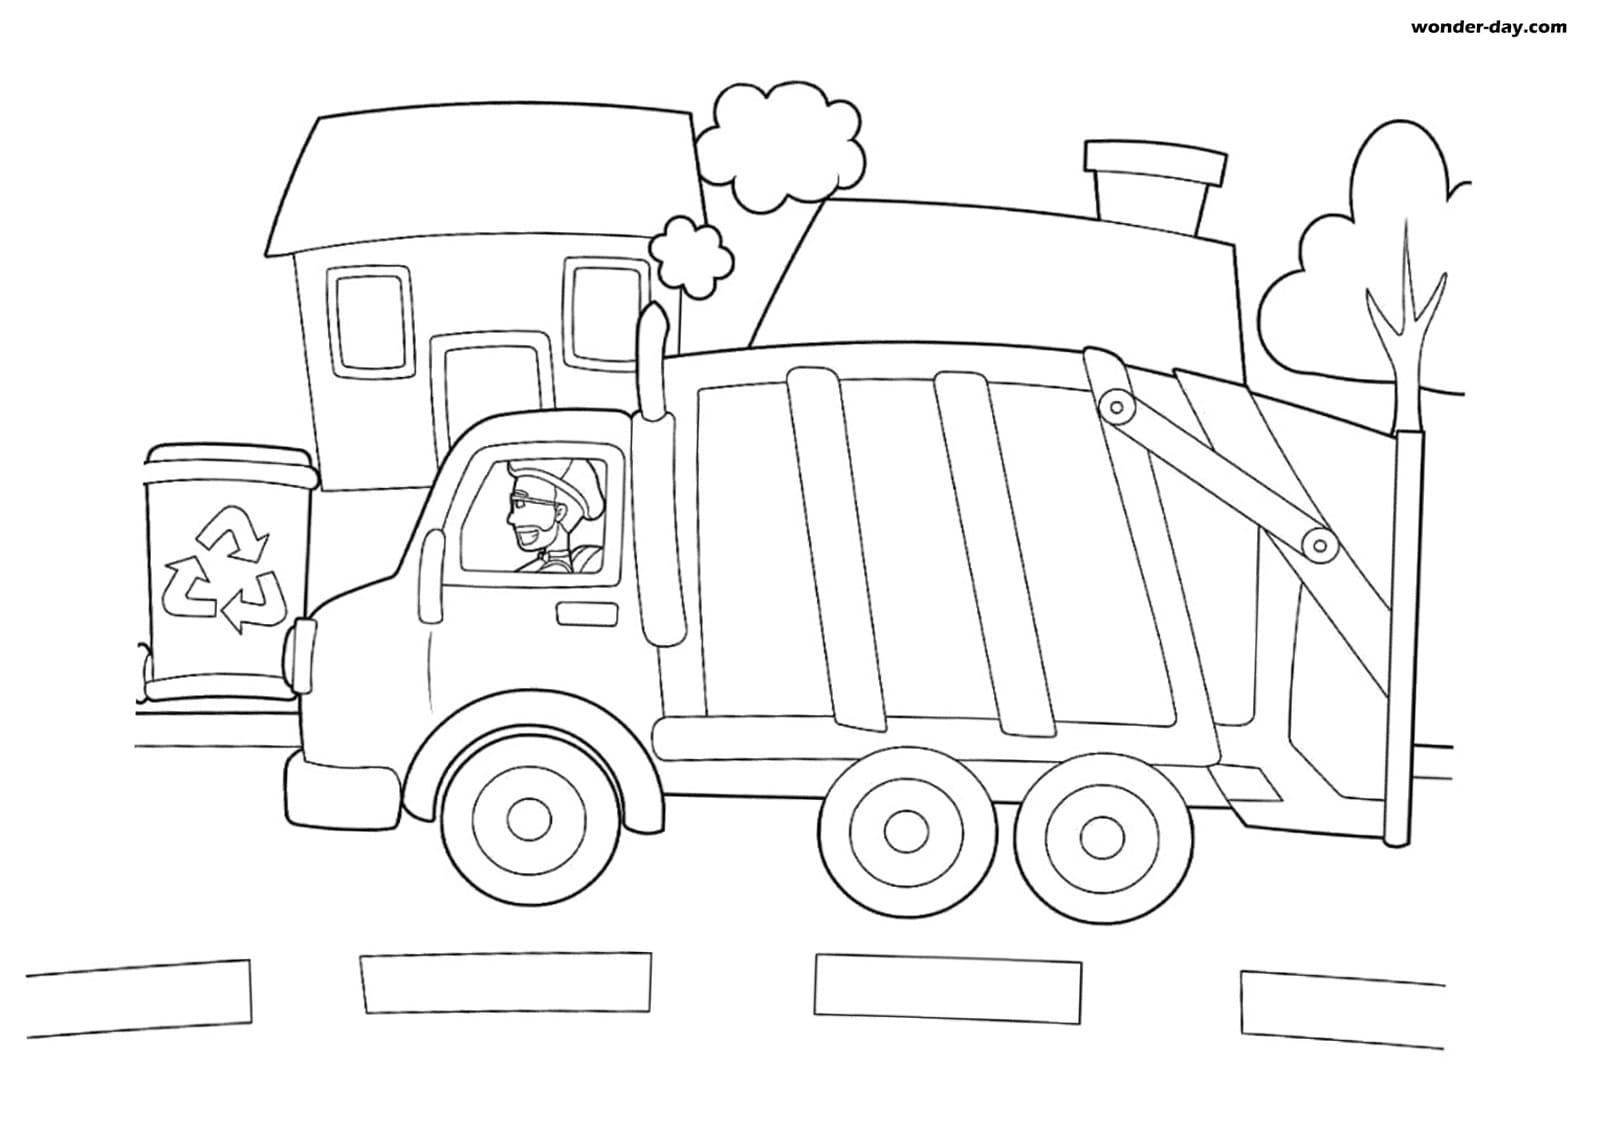 blippi-excavator-coloring-page